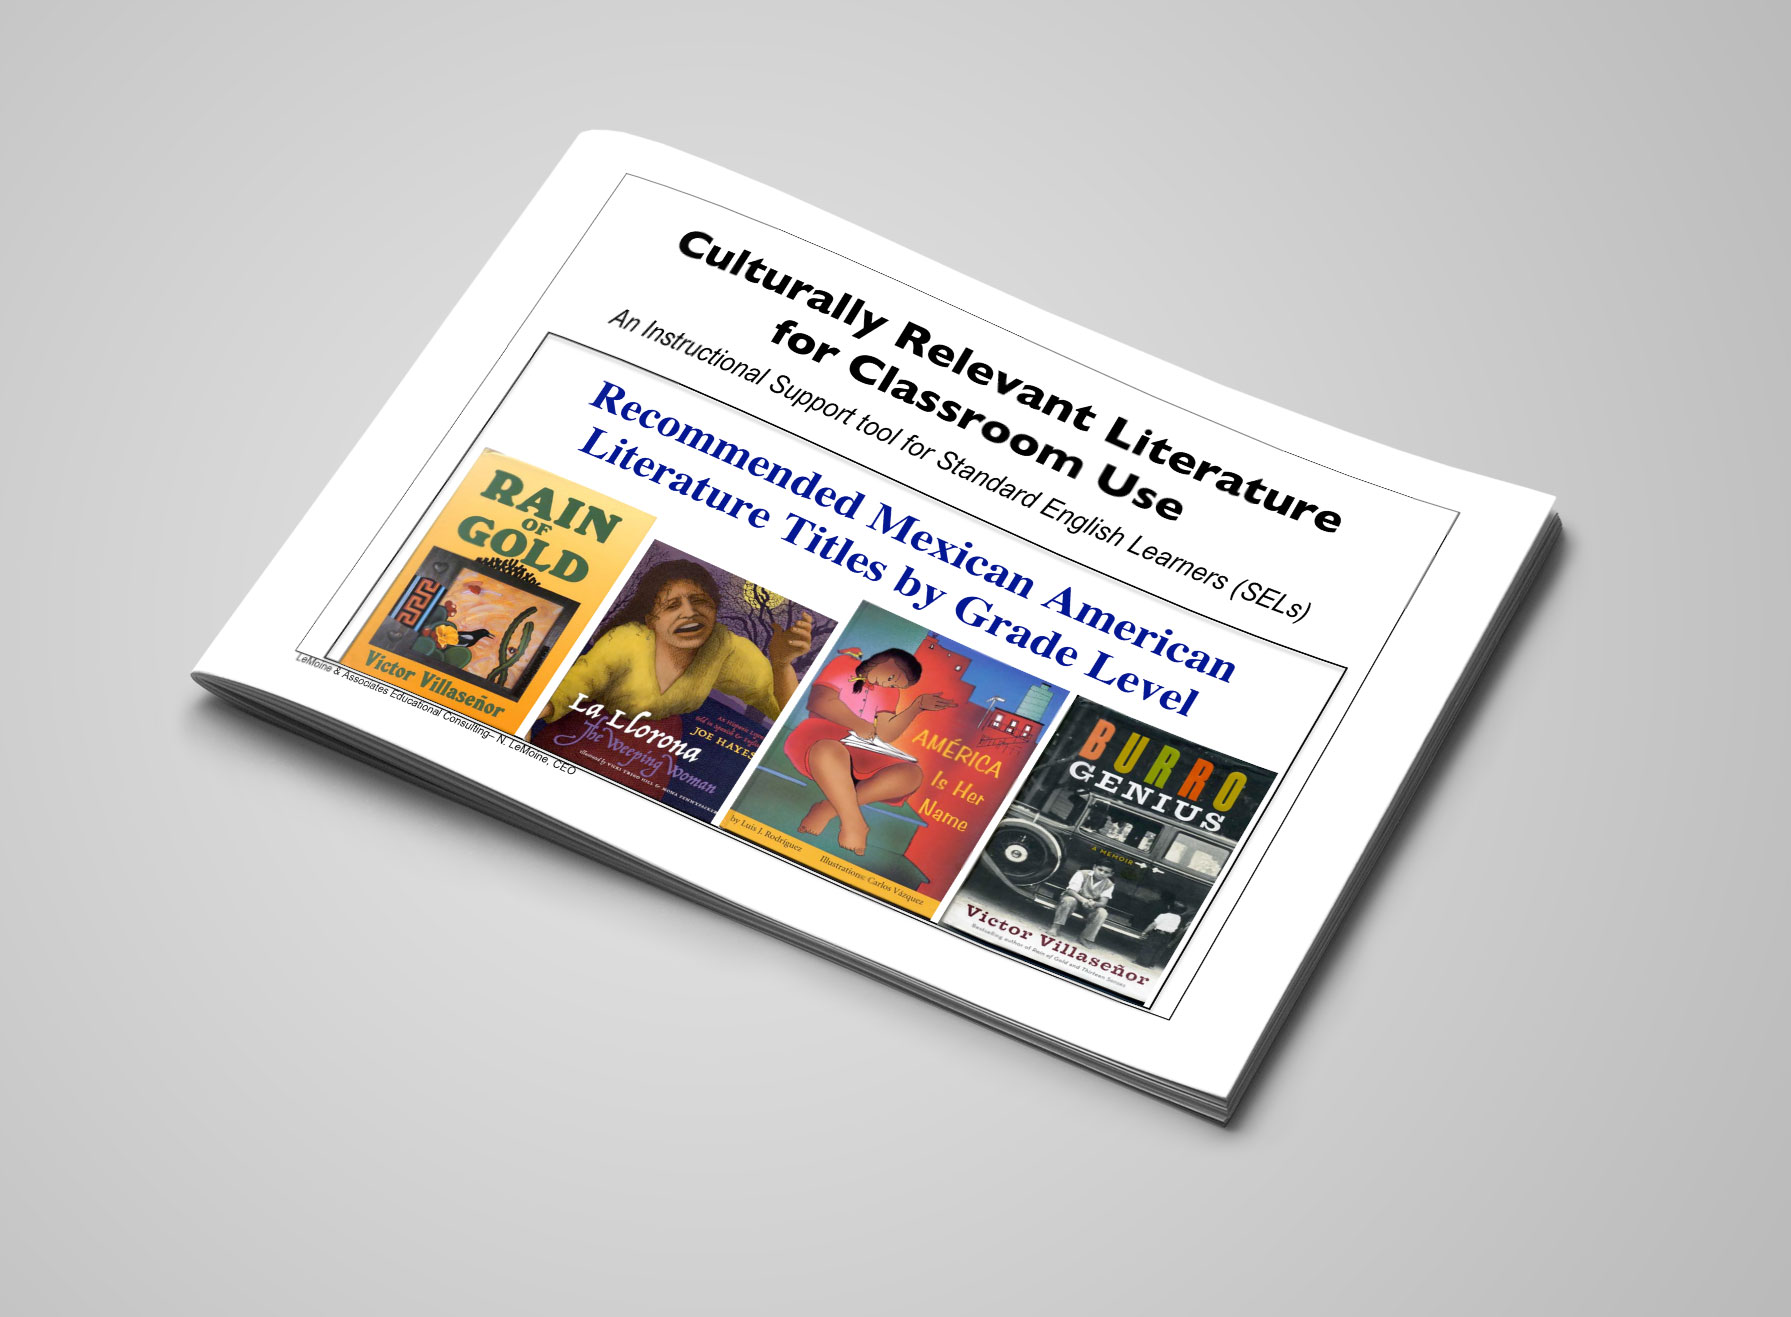 Culturally Relevant Literature for Classroom Use Recommended Mexican American Literature Titles by Grade Level